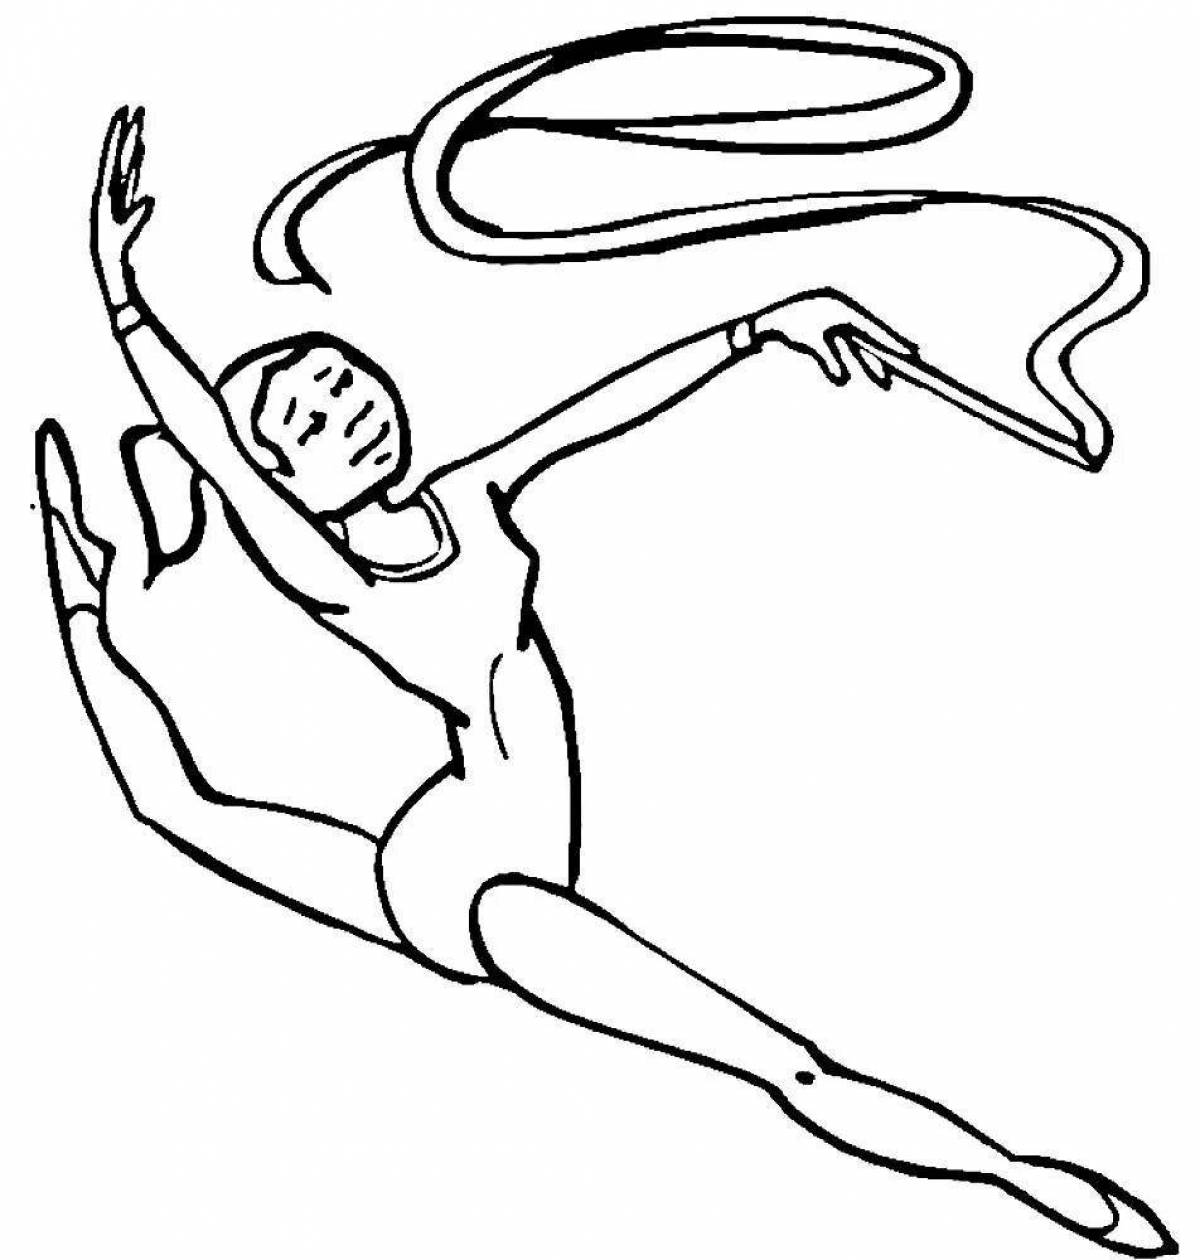 Gymnast fun coloring book for kids